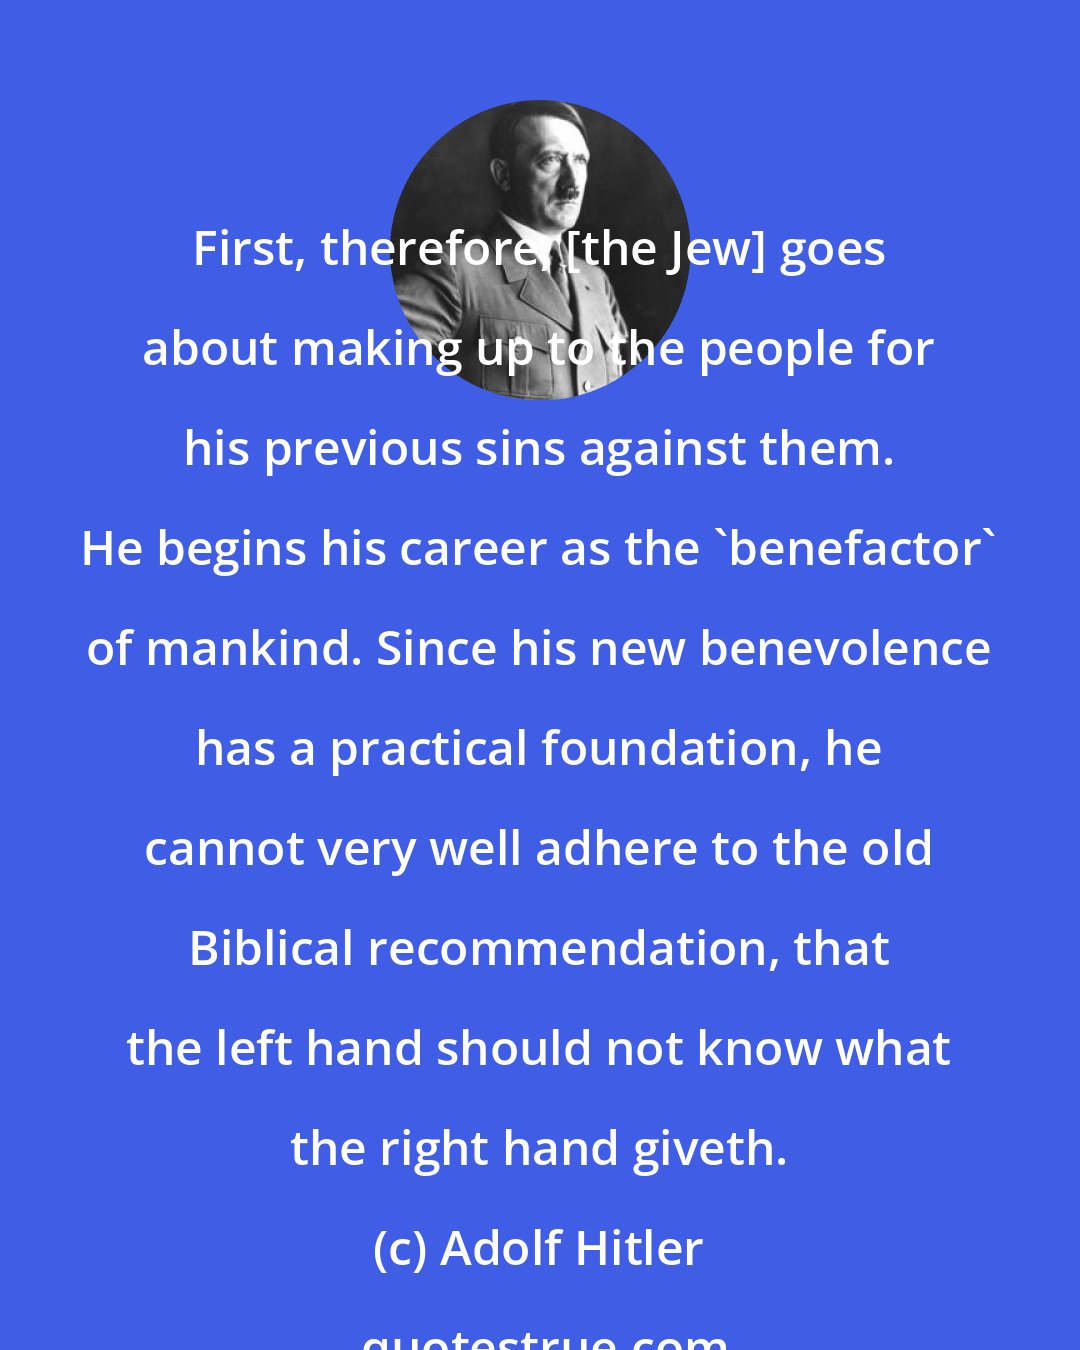 Adolf Hitler: First, therefore, [the Jew] goes about making up to the people for his previous sins against them. He begins his career as the 'benefactor' of mankind. Since his new benevolence has a practical foundation, he cannot very well adhere to the old Biblical recommendation, that the left hand should not know what the right hand giveth.